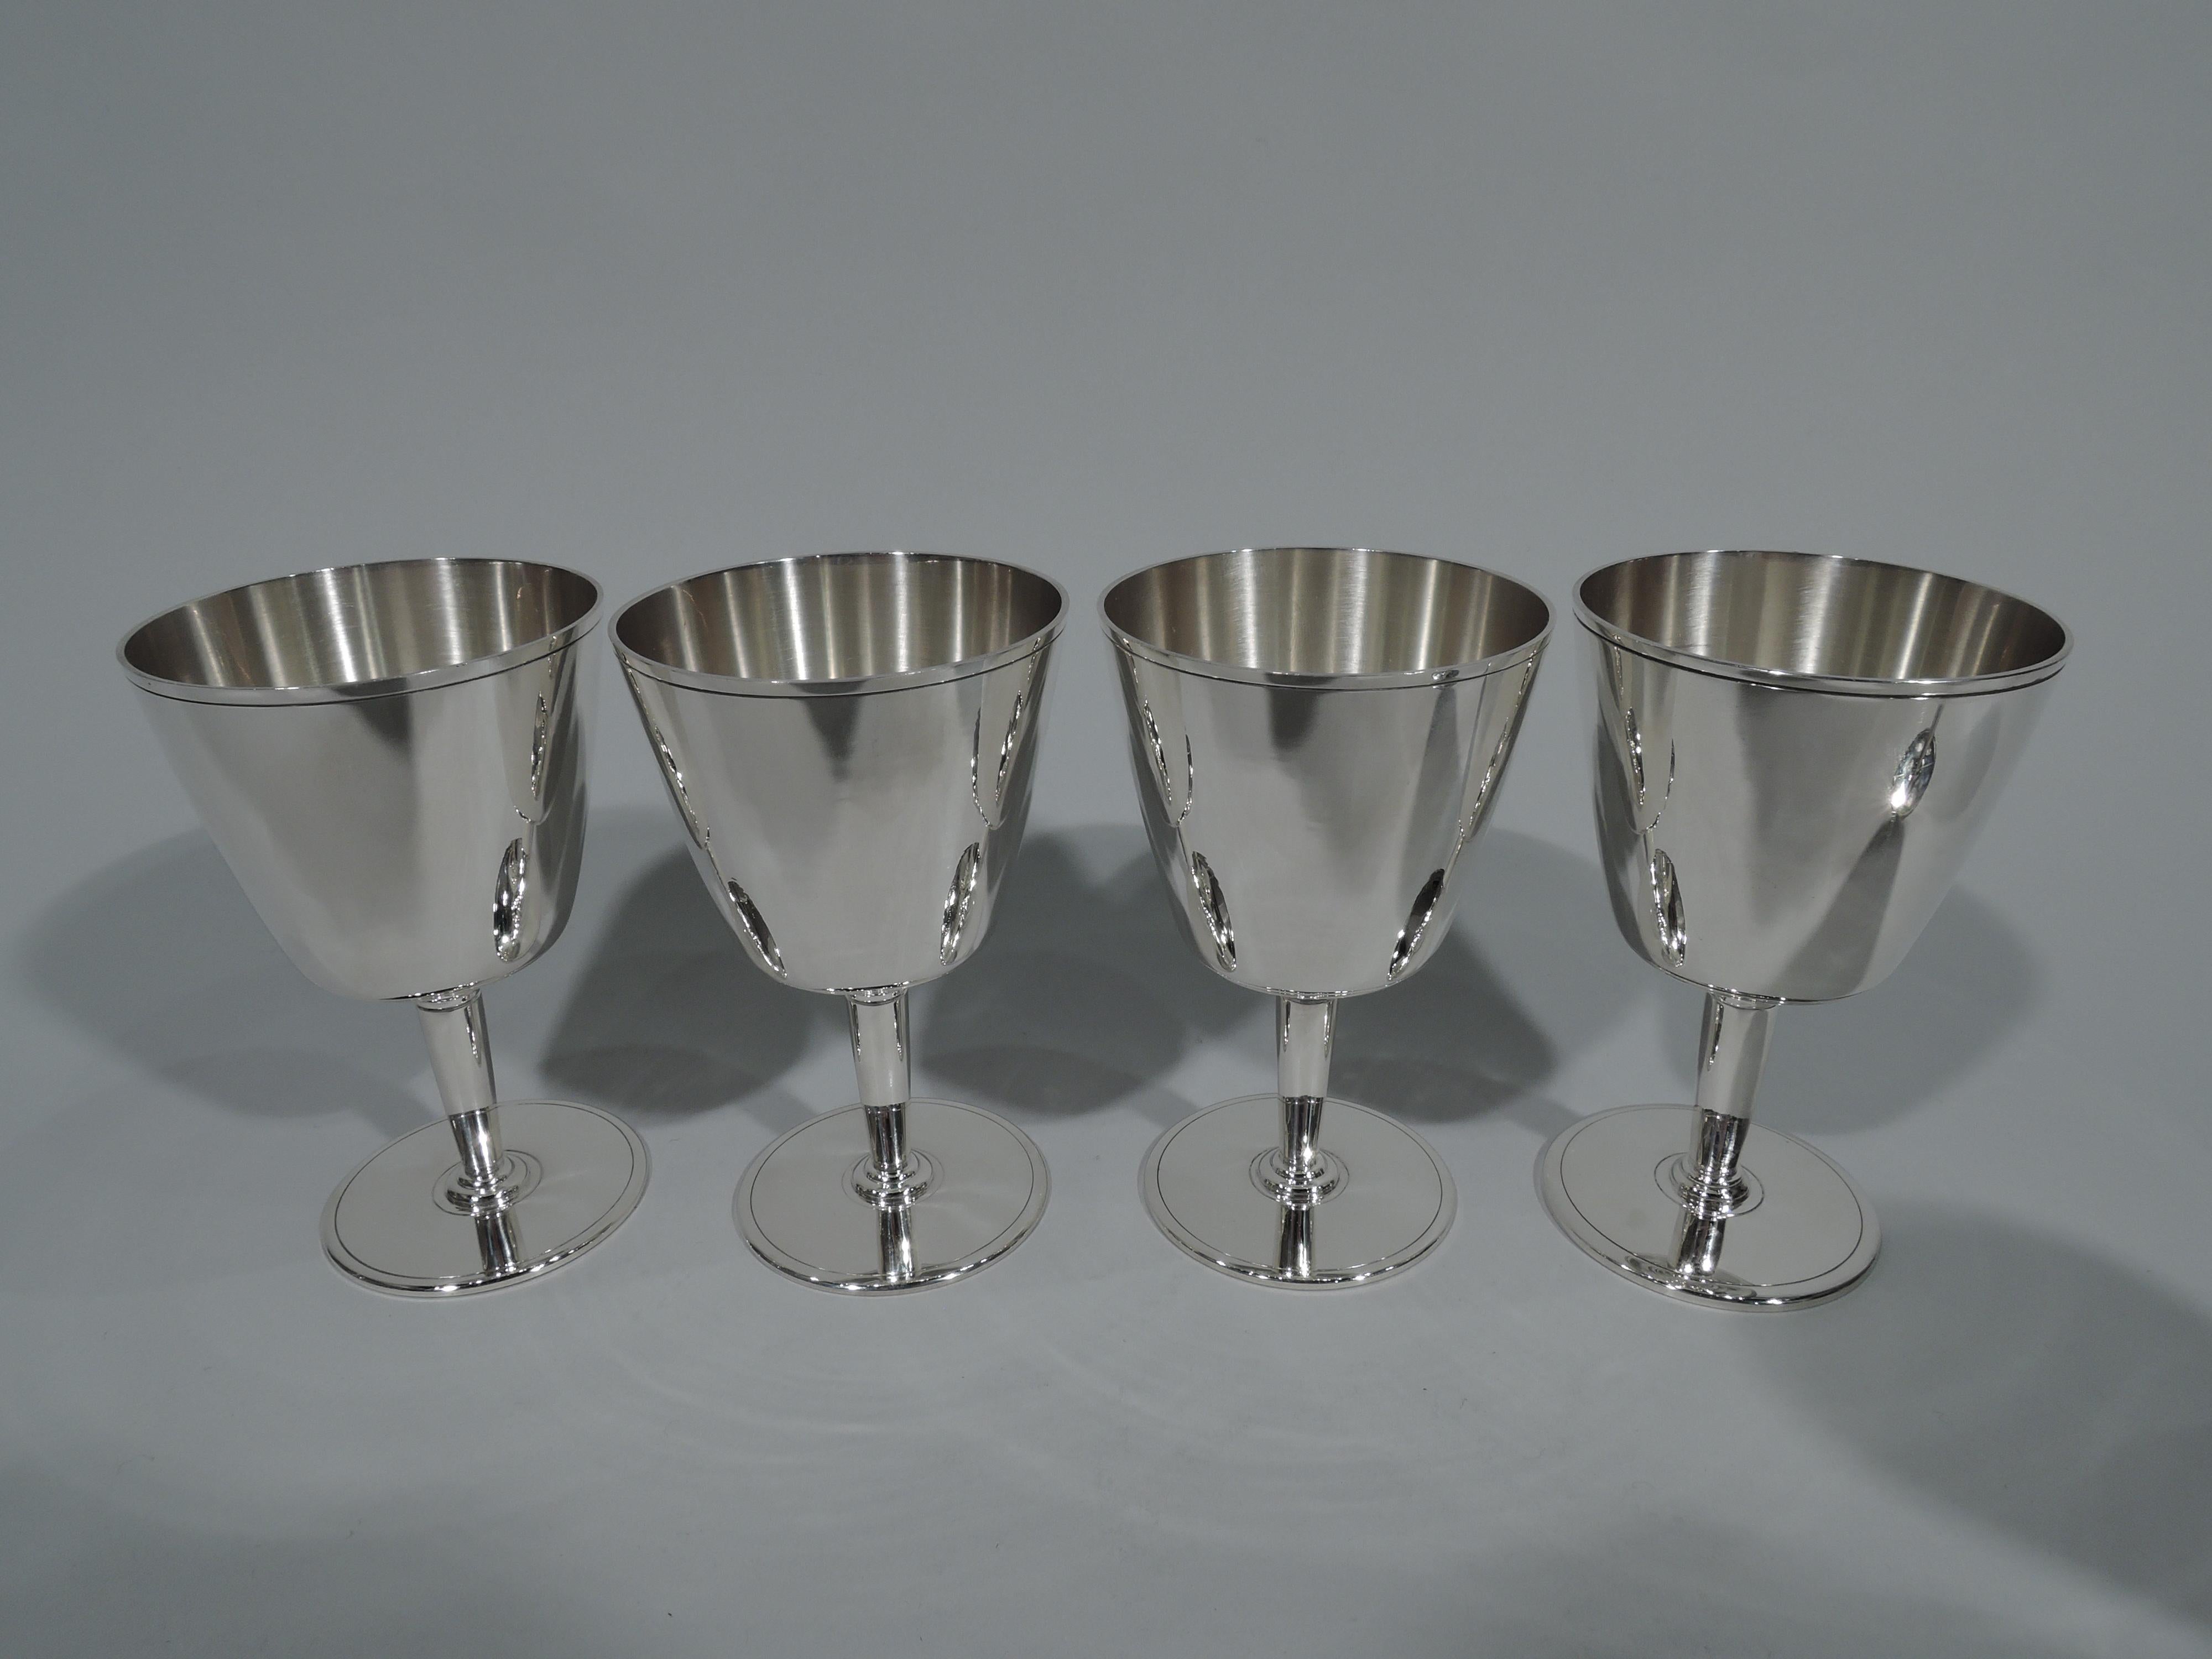 Set of 12 Art Deco sterling silver cocktail cups. Made by Tiffany & Co. in New York. Each: Truncated cone with flat bottom, tapering stem, and flat circular foot. Incised bands on bowl rim and foot rim. Spare and functional. Hallmarks include